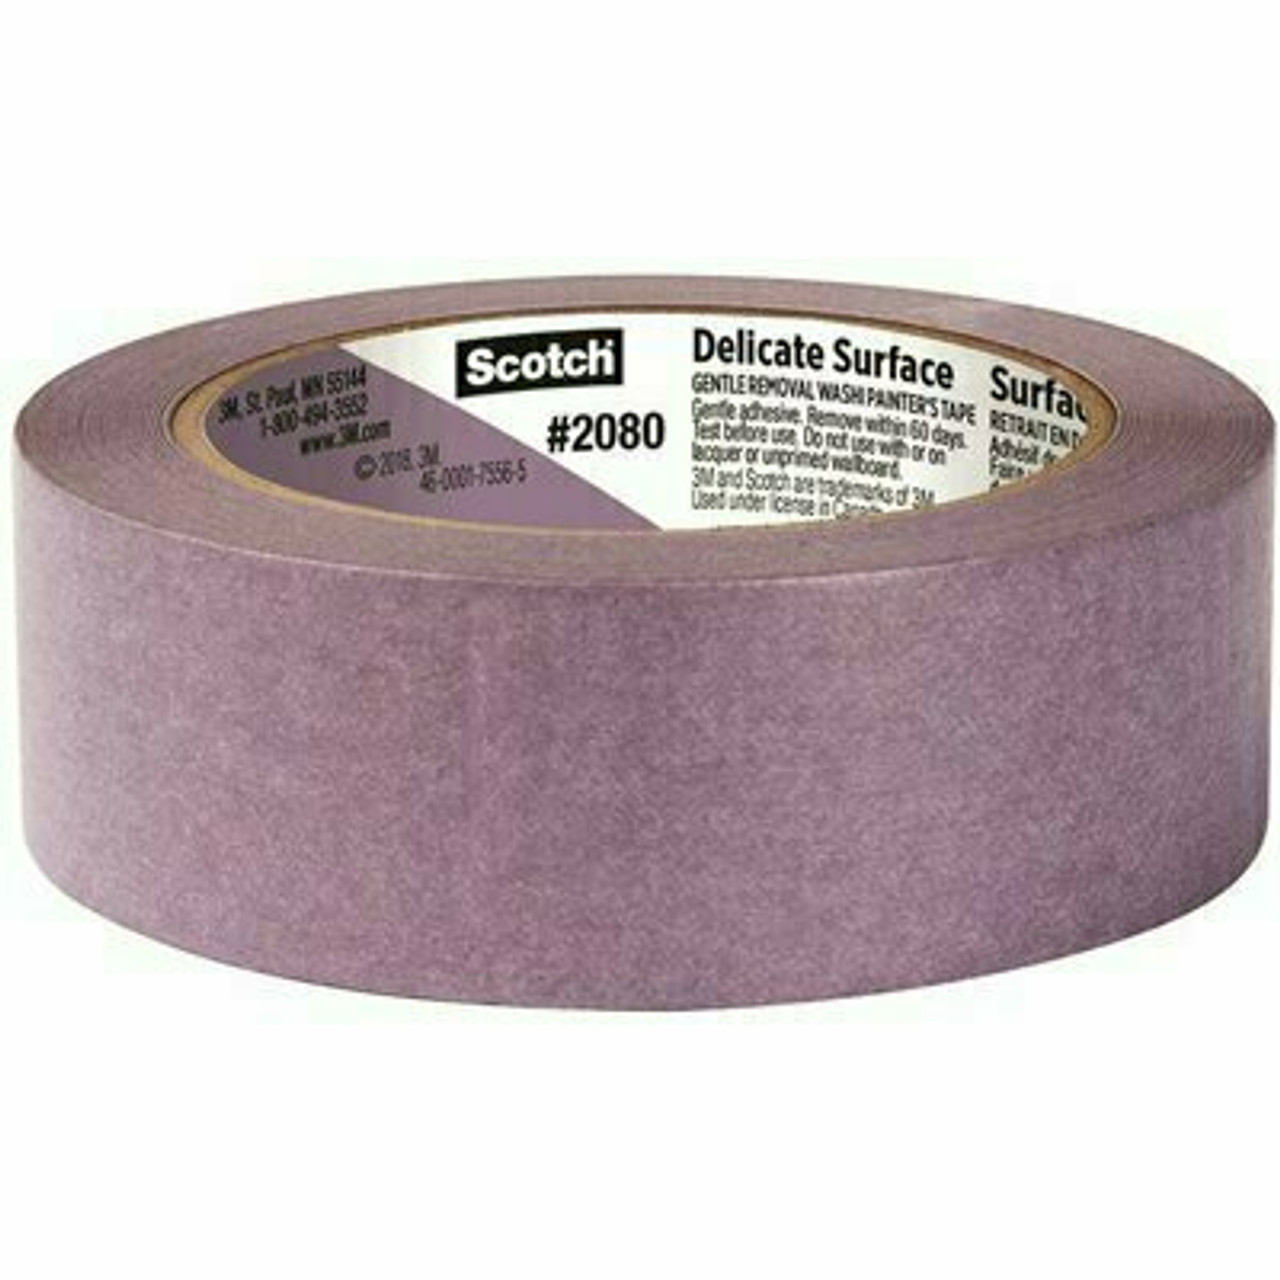 3M Scotch 1.41 In. X 60 Yds. Delicate Surface Painter'S Tape With Edge-Lock (4-Pack)